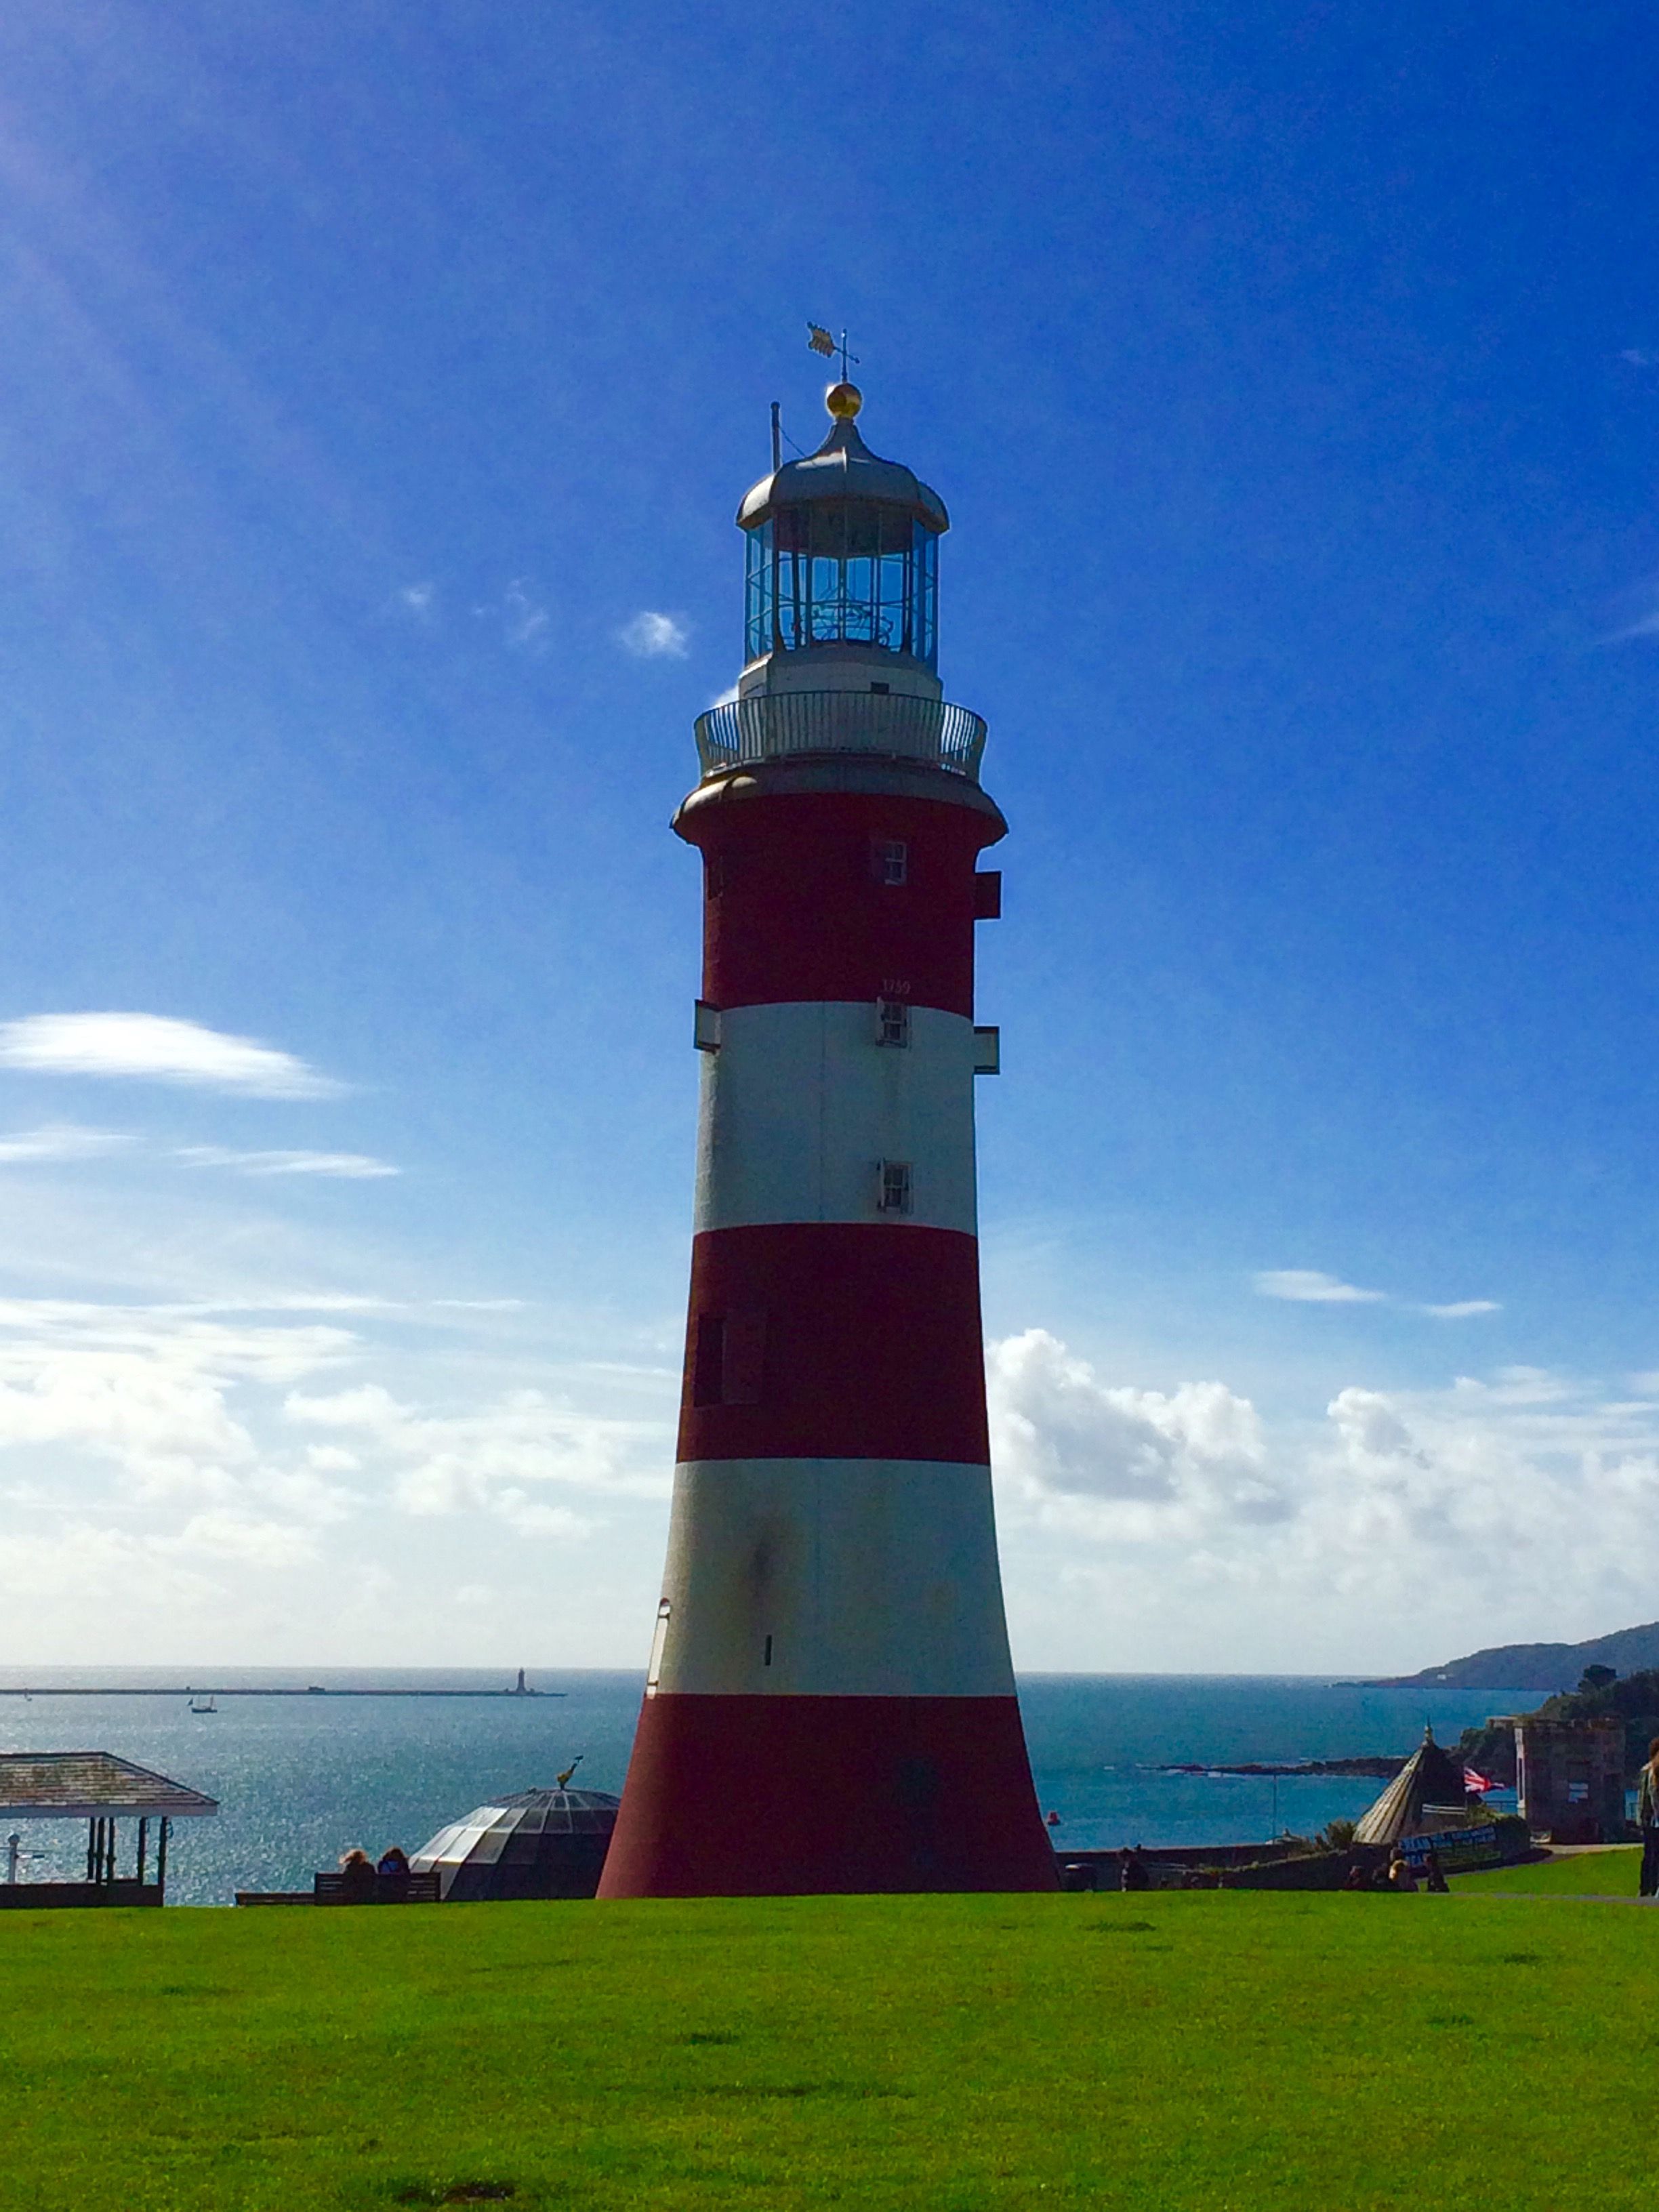 Smeaton's Tower Plymouth Hoe | Plymouth | Pinterest | Plymouth and Tower